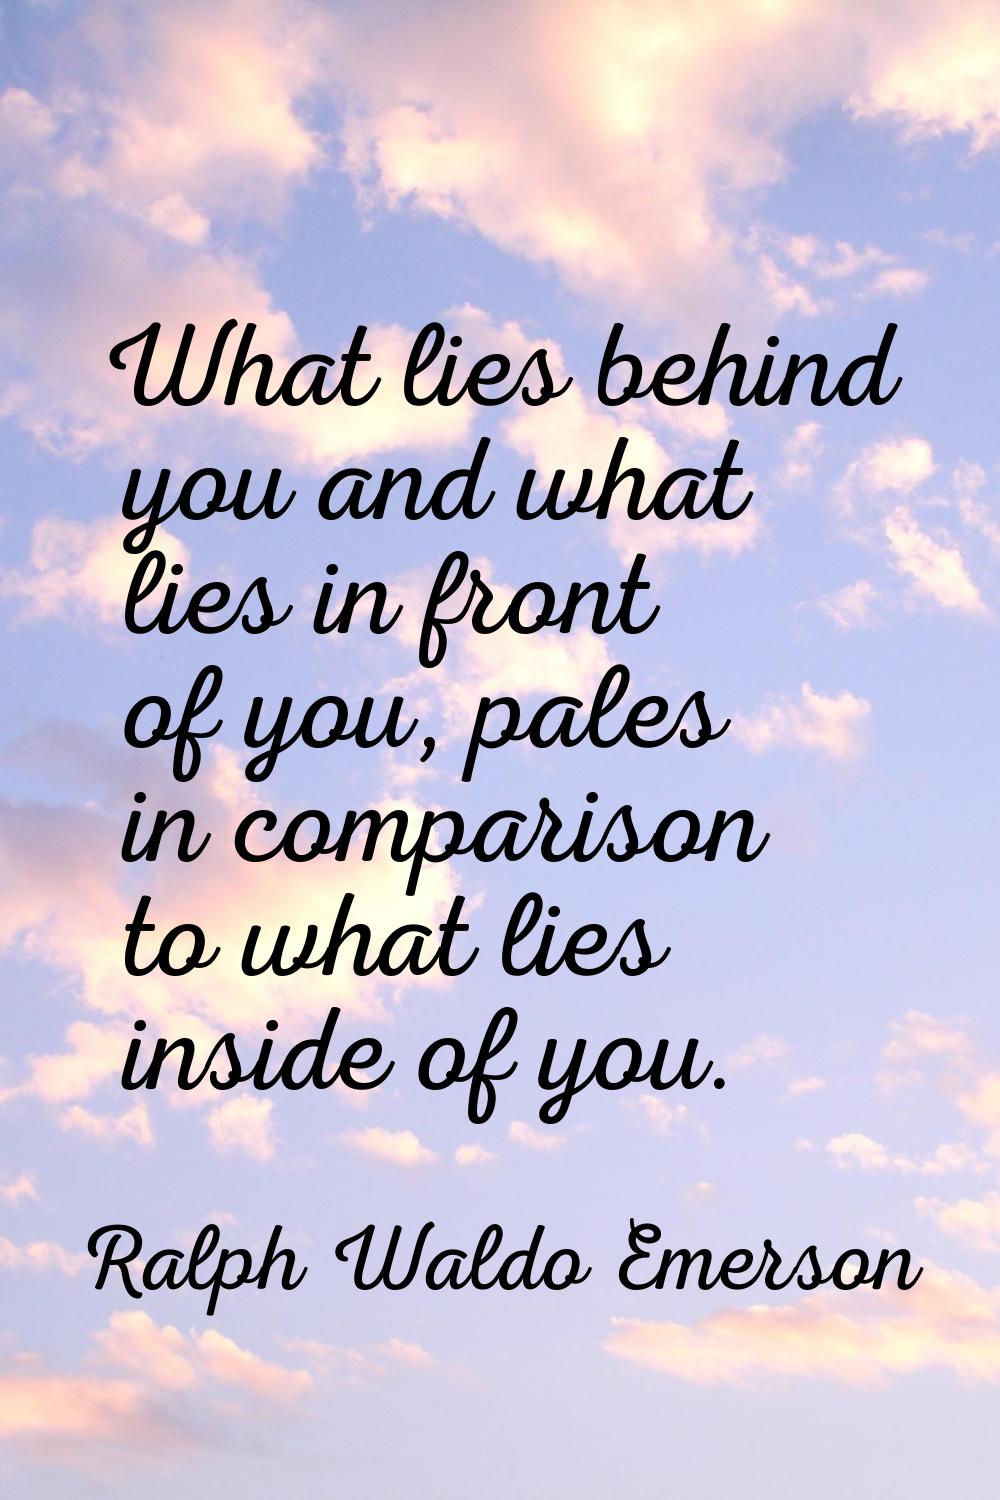 What lies behind you and what lies in front of you, pales in comparison to what lies inside of you.